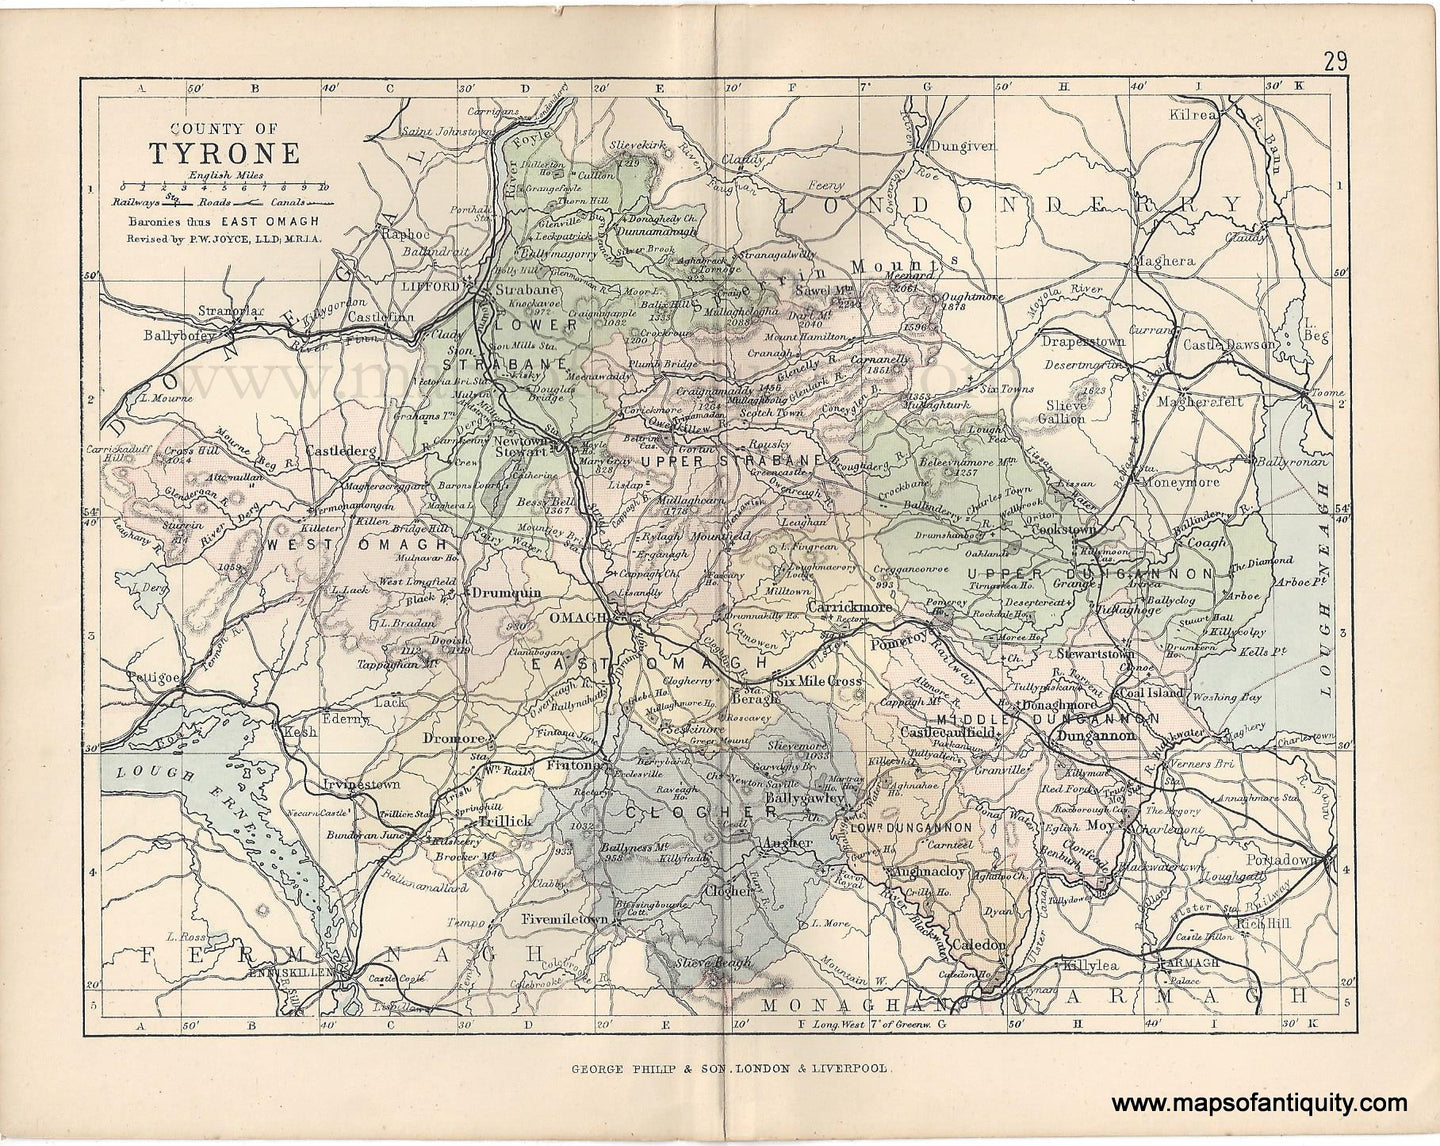 Genuine-Antique-Map-Ireland-County-of-Tyrone-1884-George-Philip-&-Son-Maps-Of-Antiquity